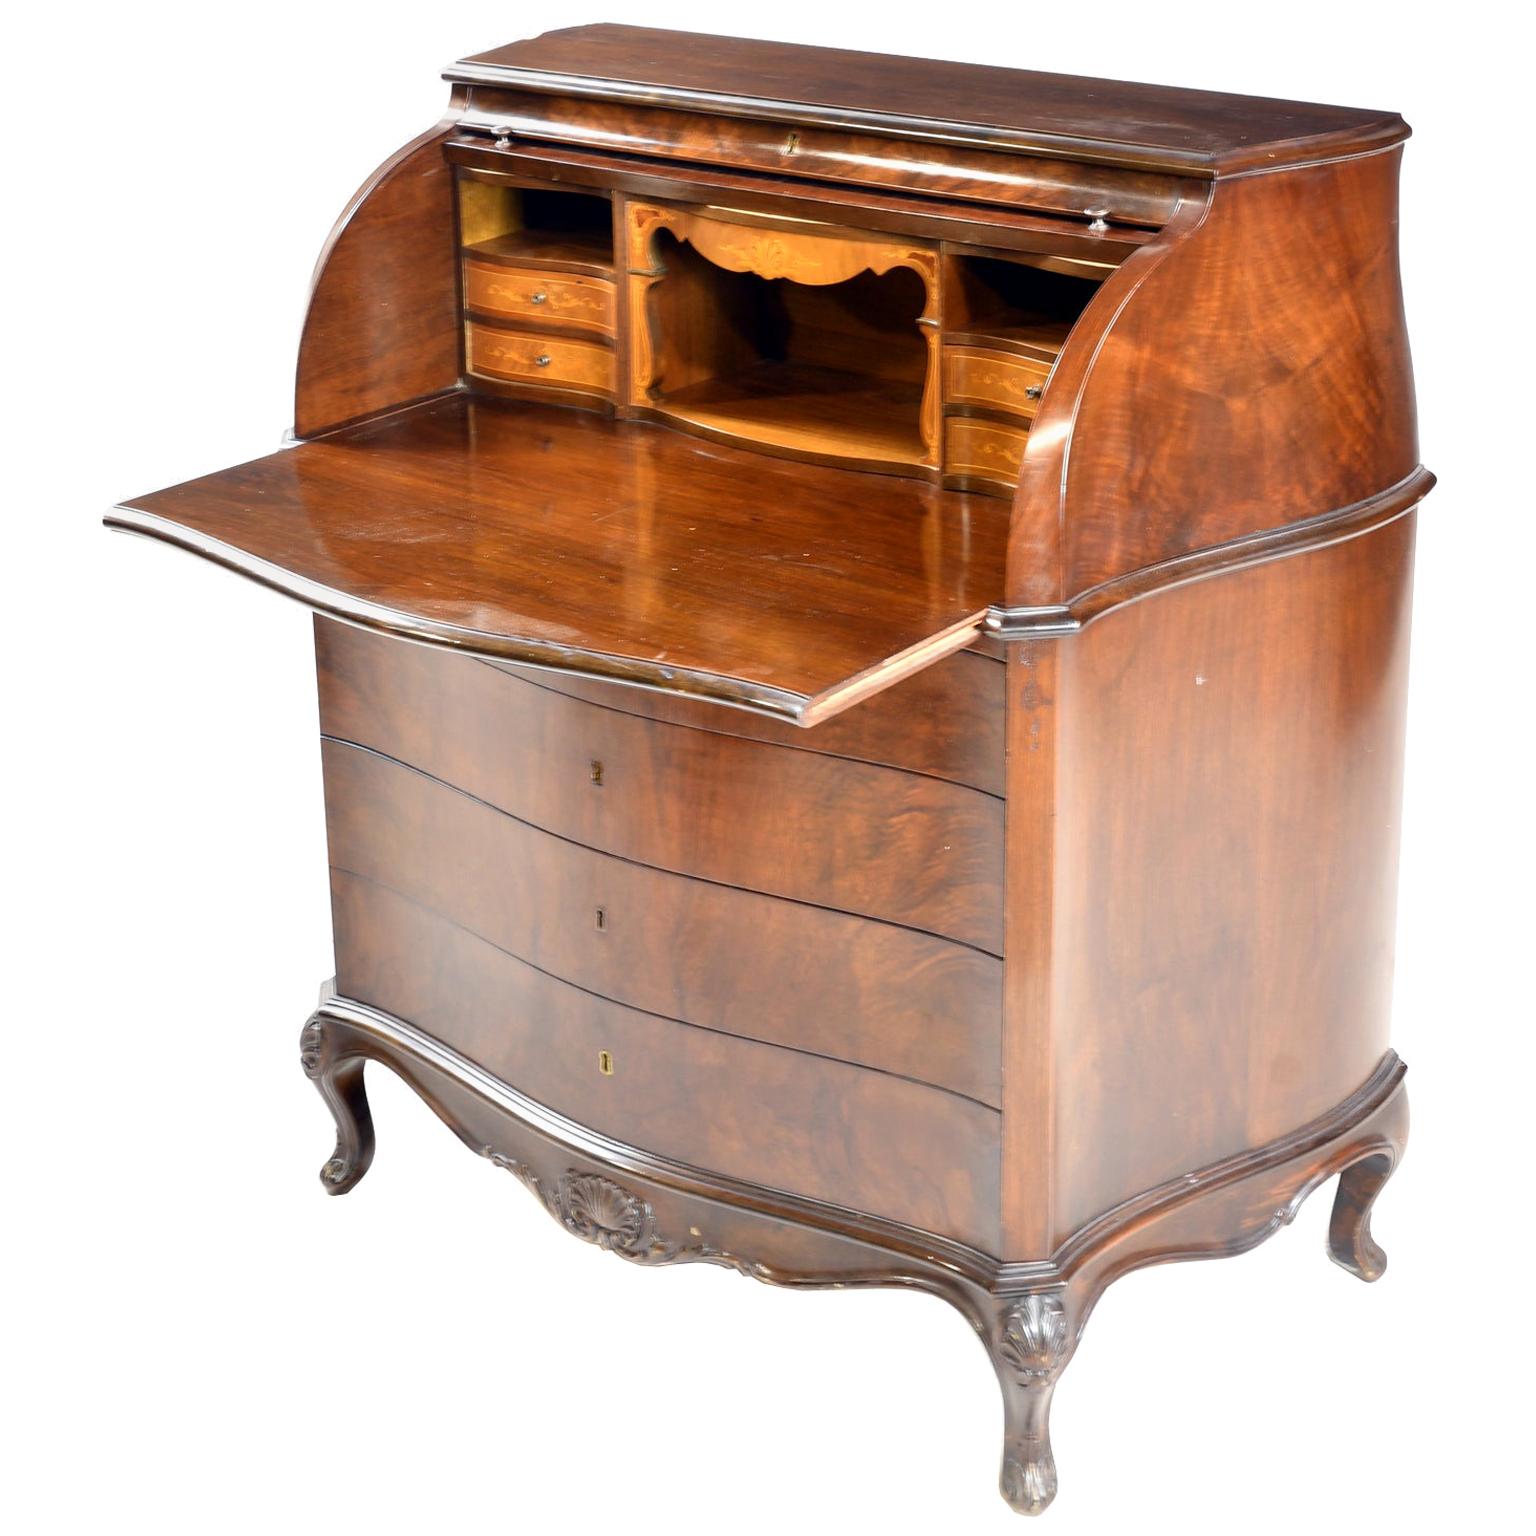 Lady's Writing Desk/ Secretary in Mahogany w/ Cylinder Top over Chest of Drawers